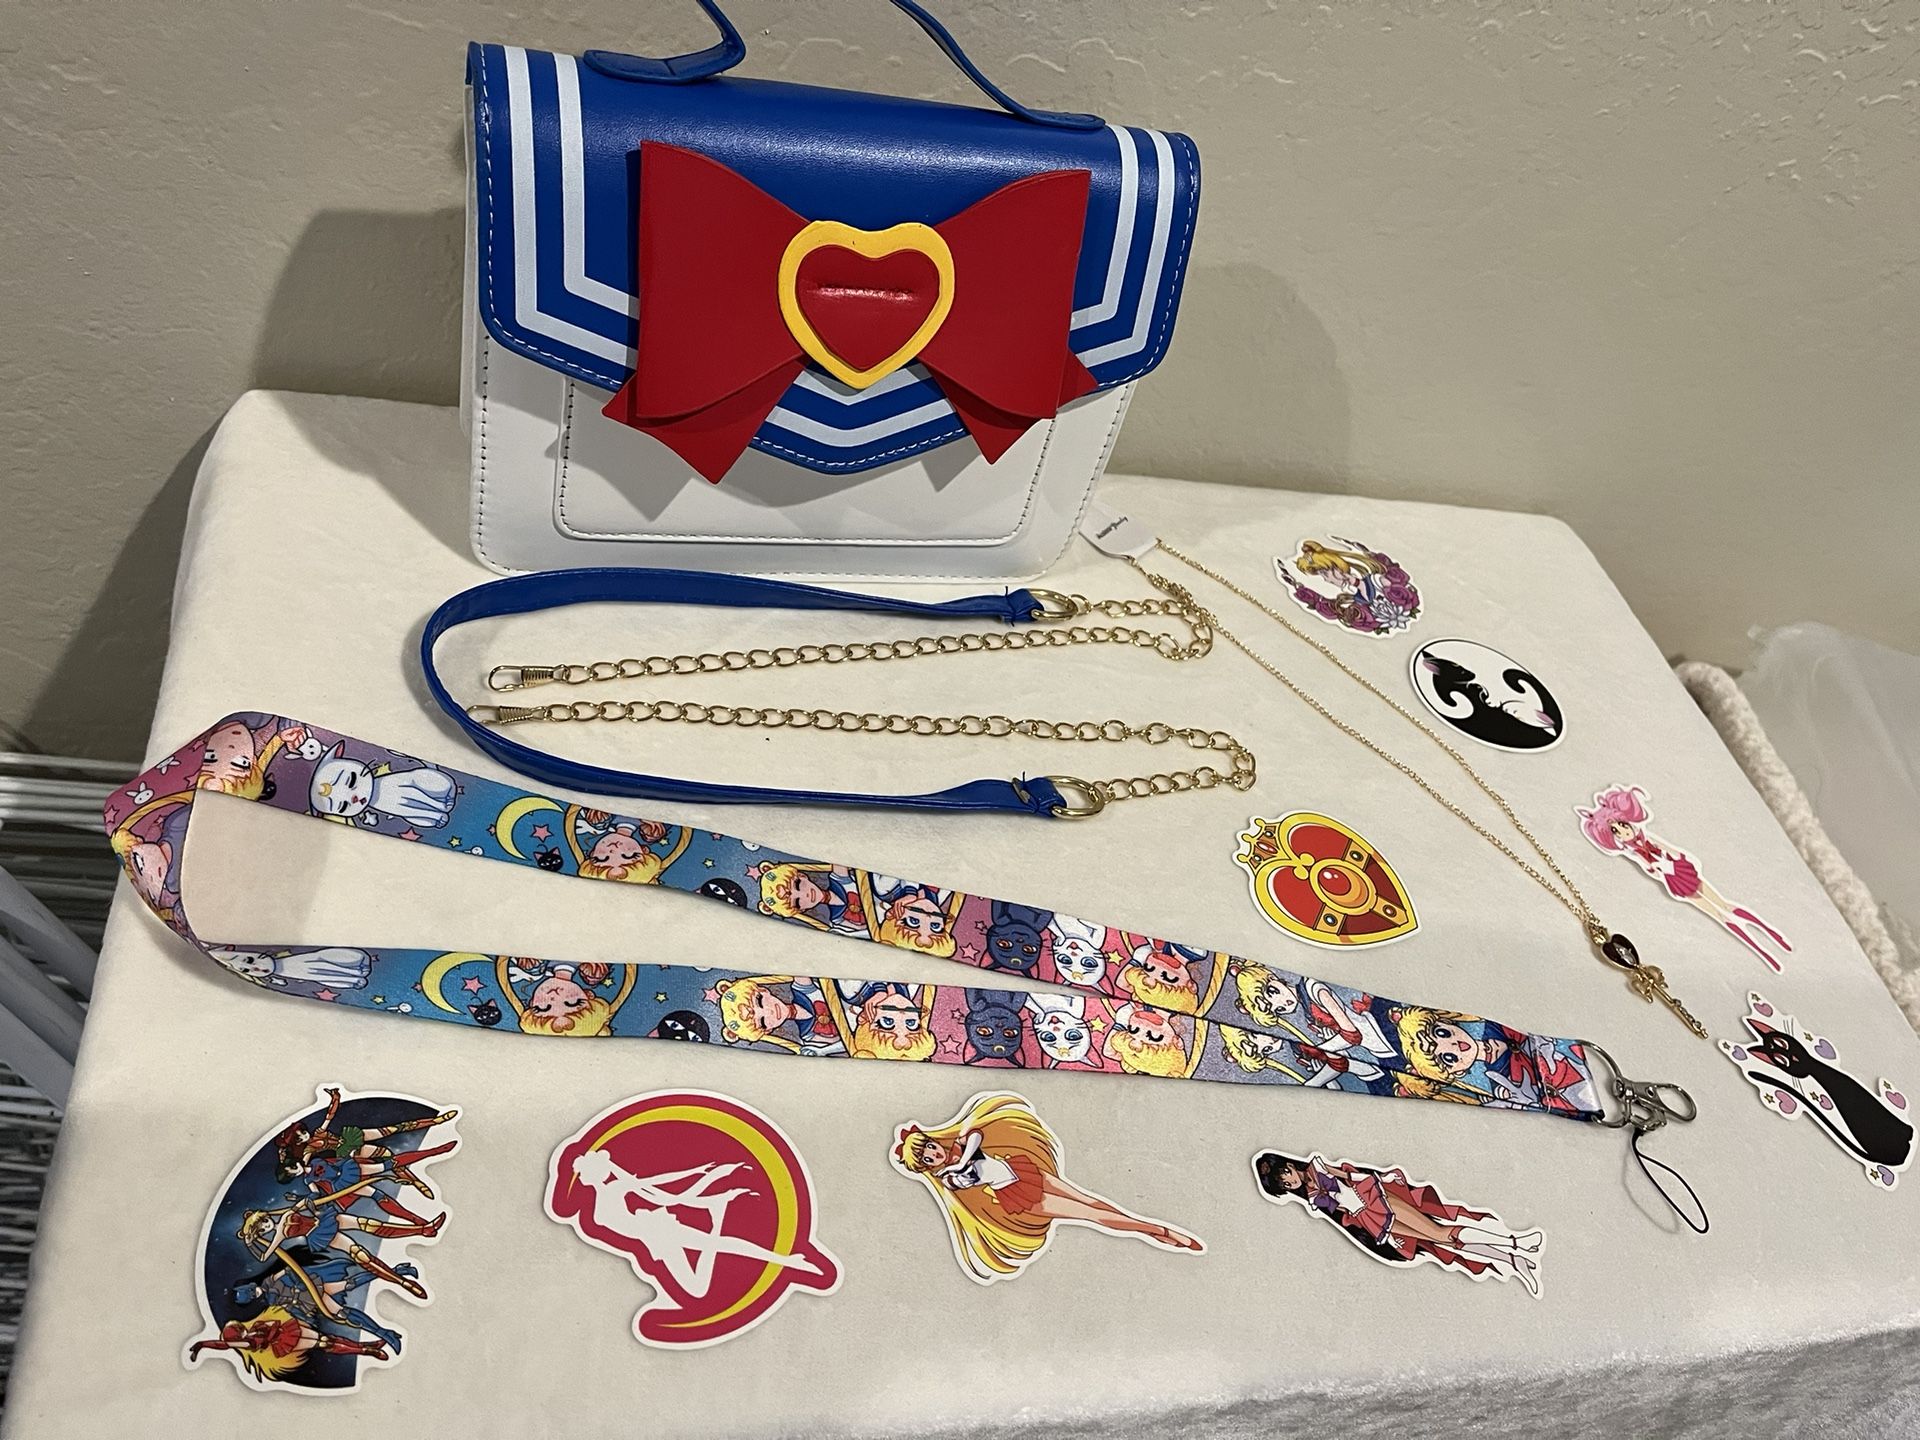 Sailor Moon Items $35 All Together 